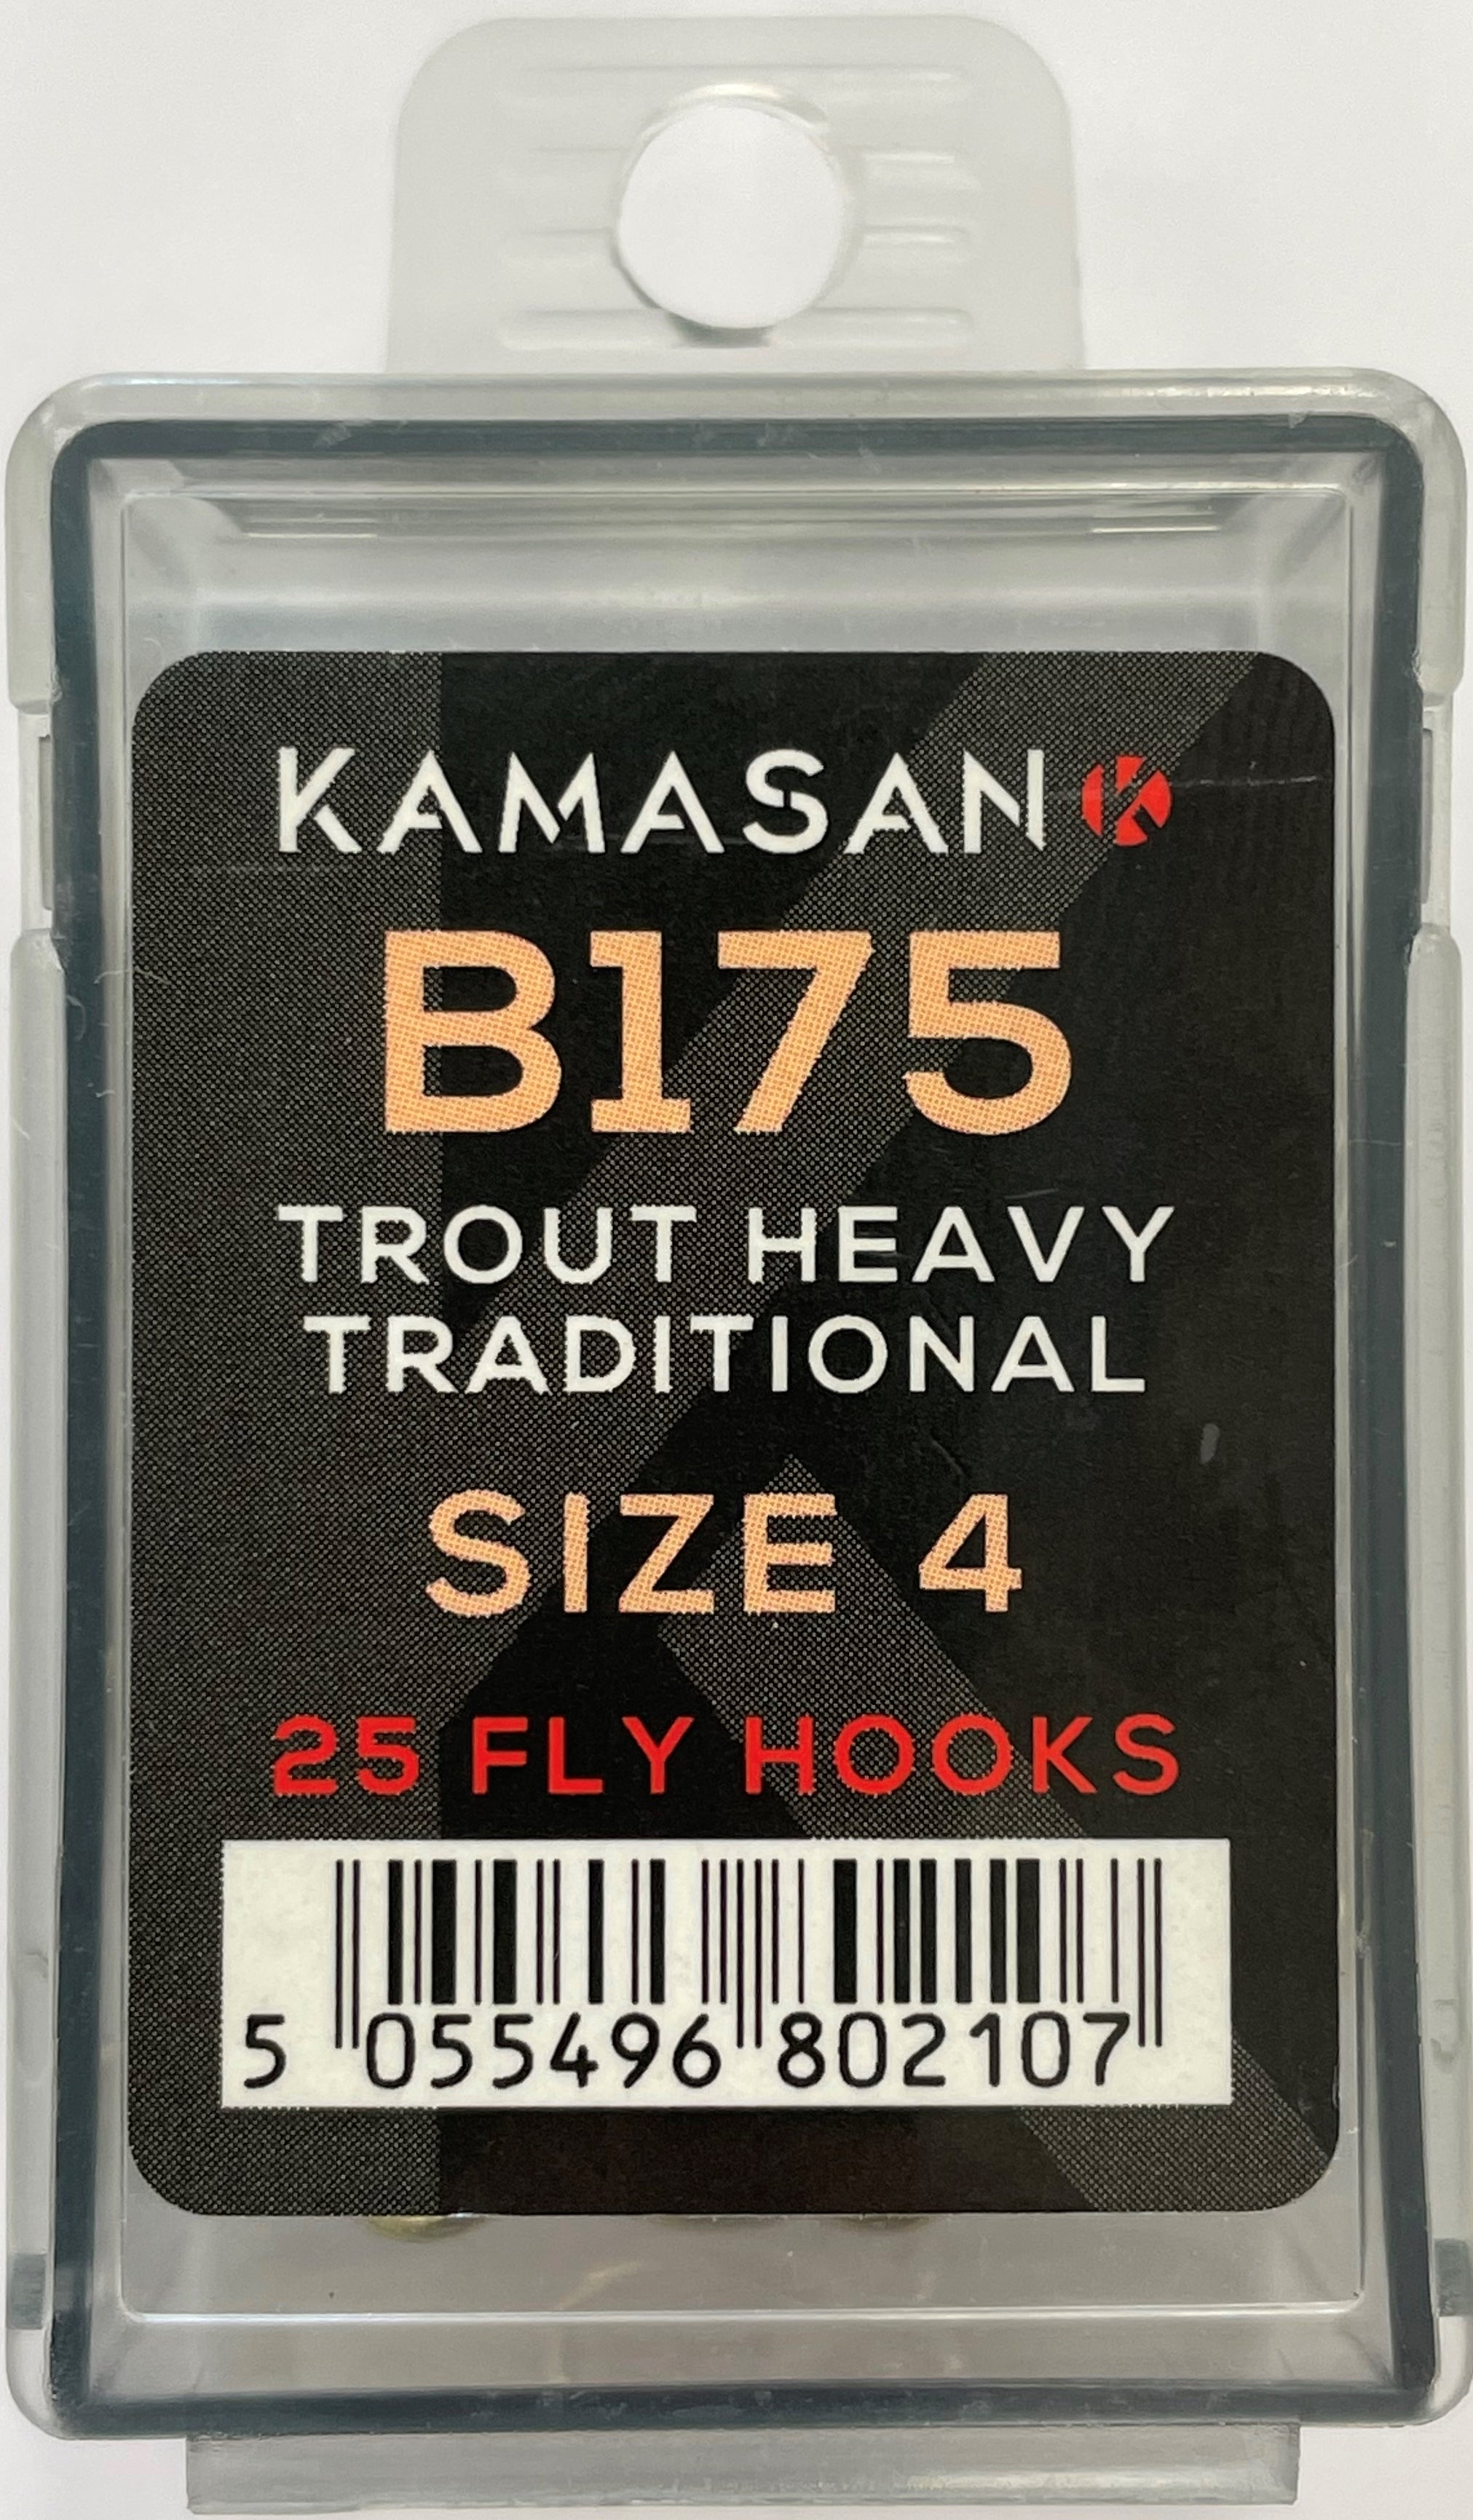 Kamasan B175 Trout Heavy Traditional Fly Hooks (Size 4) – Trophy Trout  Lures and Fly Fishing